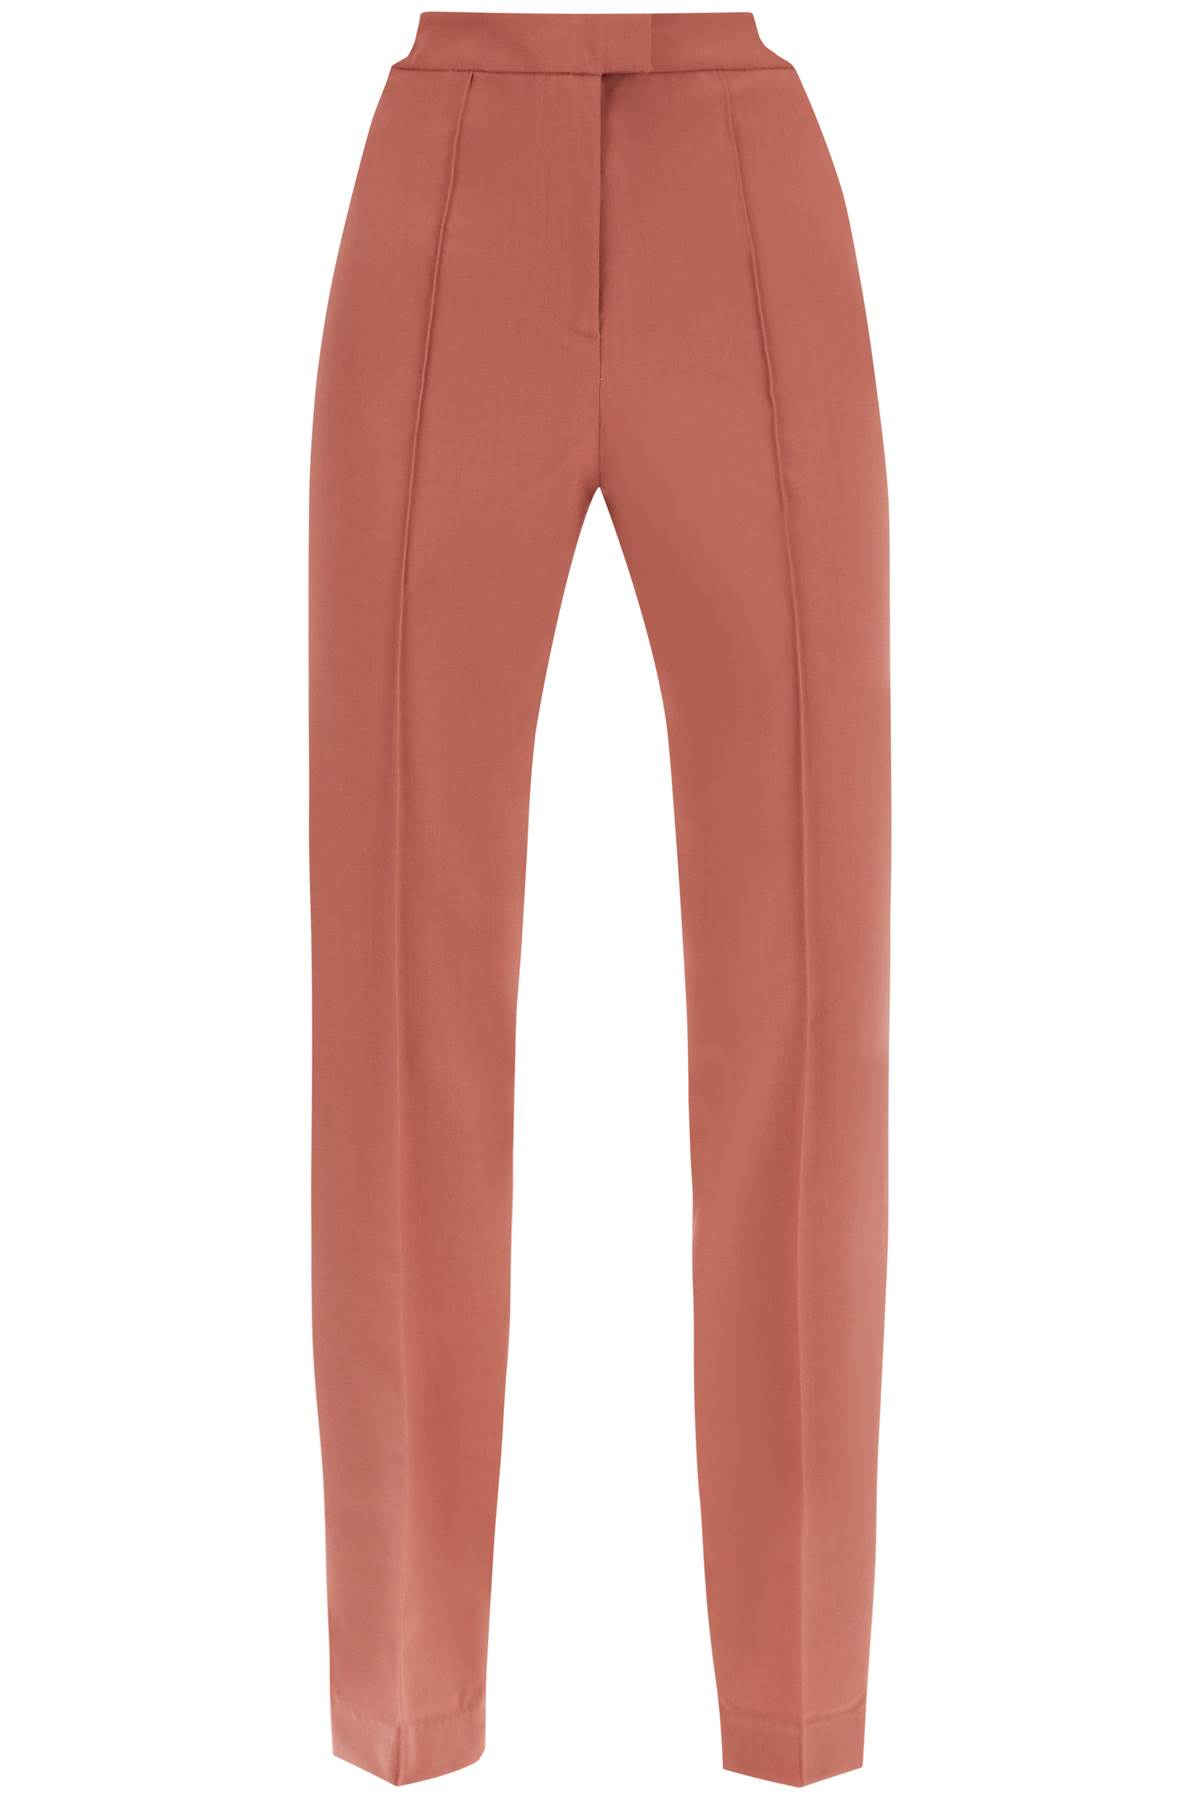 Cool Virgin Wool Pants With Heart-shaped Details